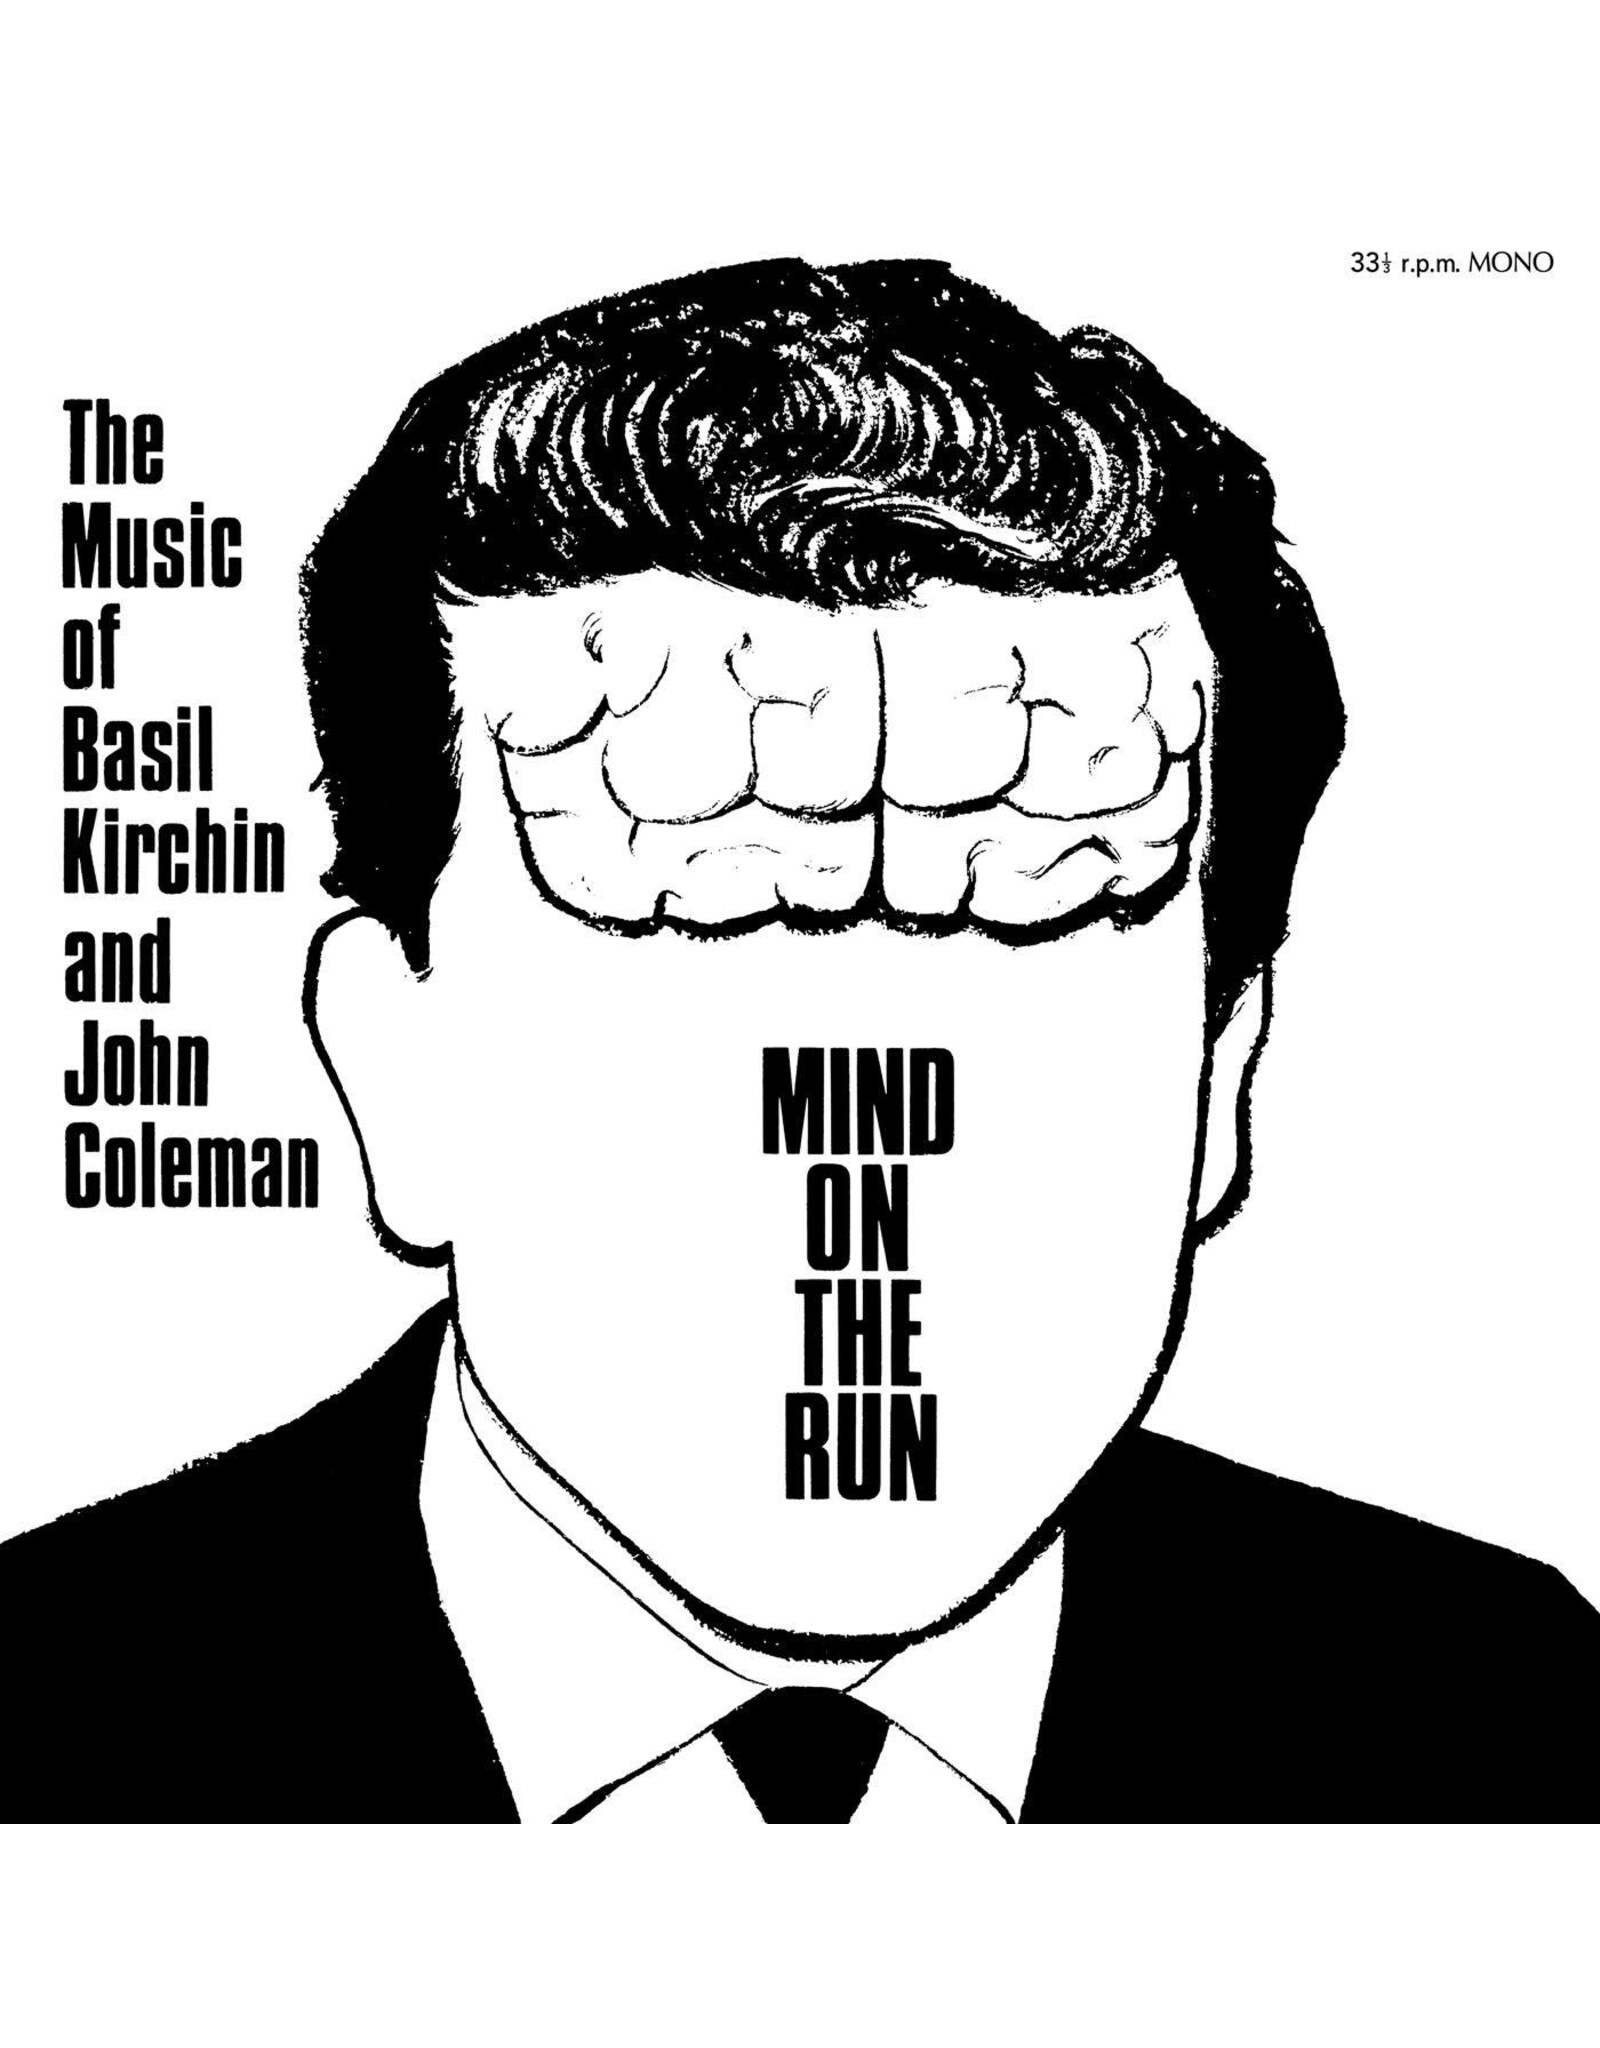 We Are Busy Bodies Kirchin, Basil & John Coleman: Mind On The Run LP